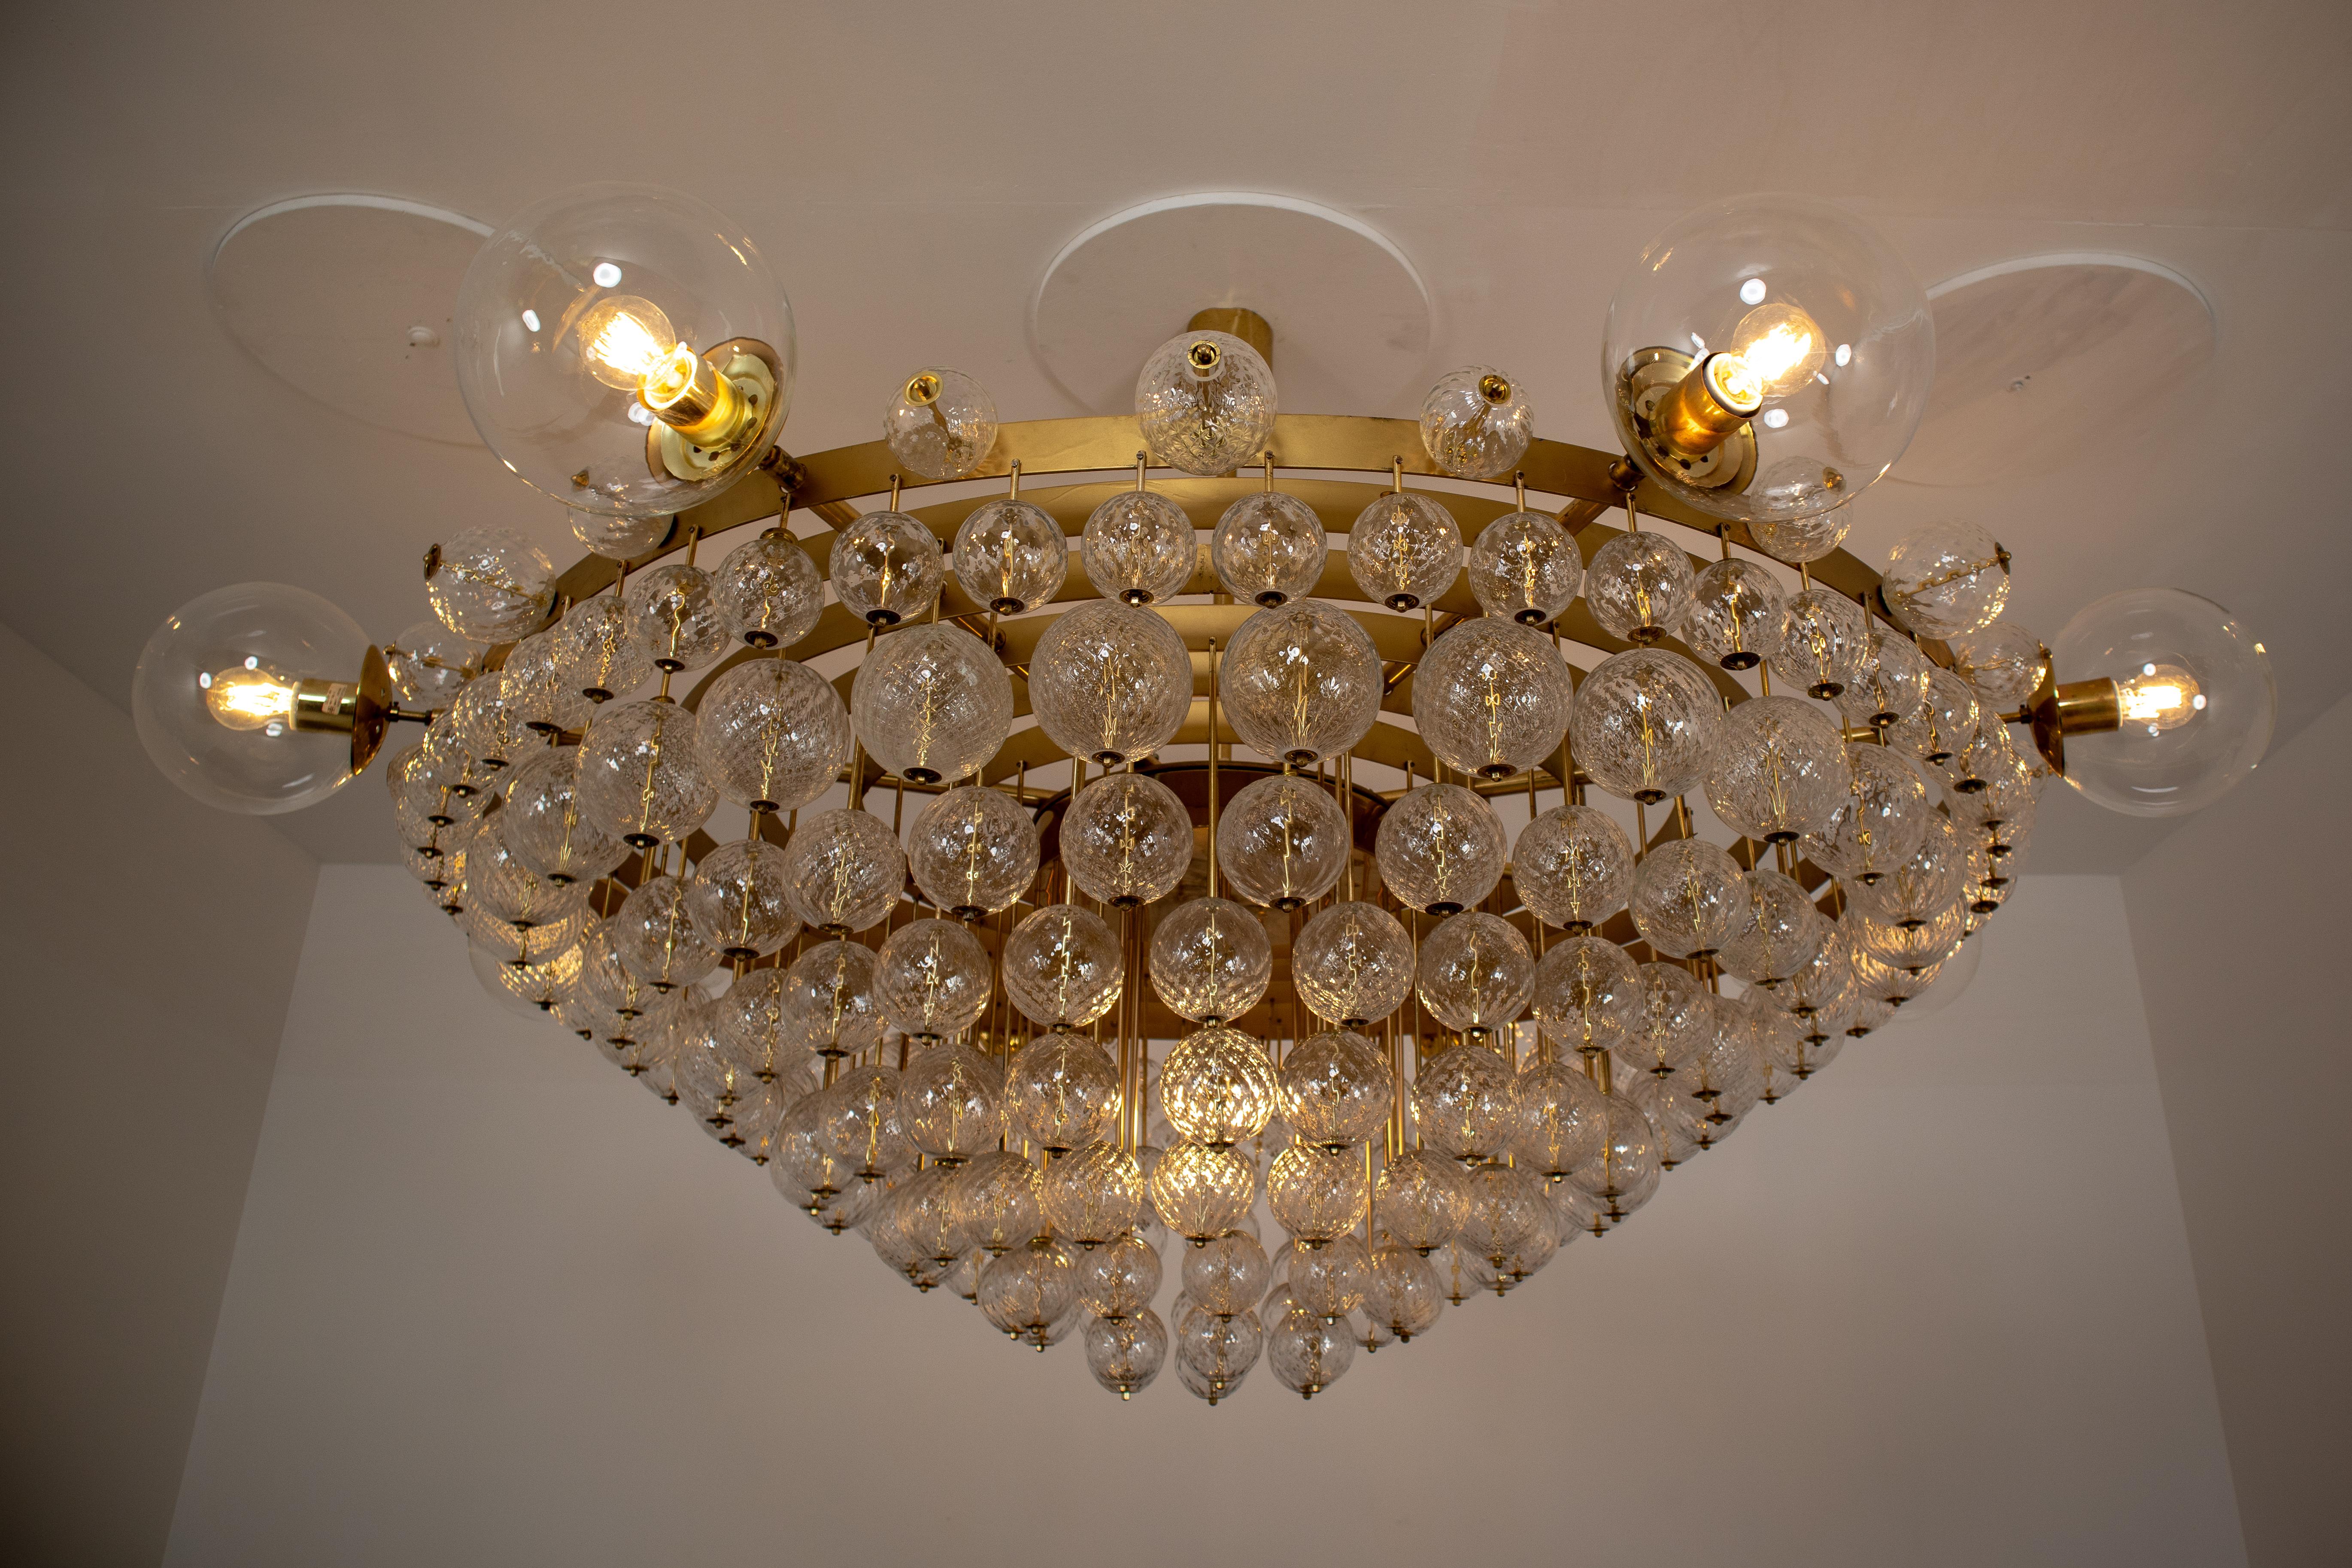 Extremely large 7.5 ft midcentury hotel chandelier with brass fixture, 8 large hand blowed glass globes and innumerous smaller structured glass globes. The chandelier with brass frame consist of 9 lights, formed in a circle. The pleasant light it